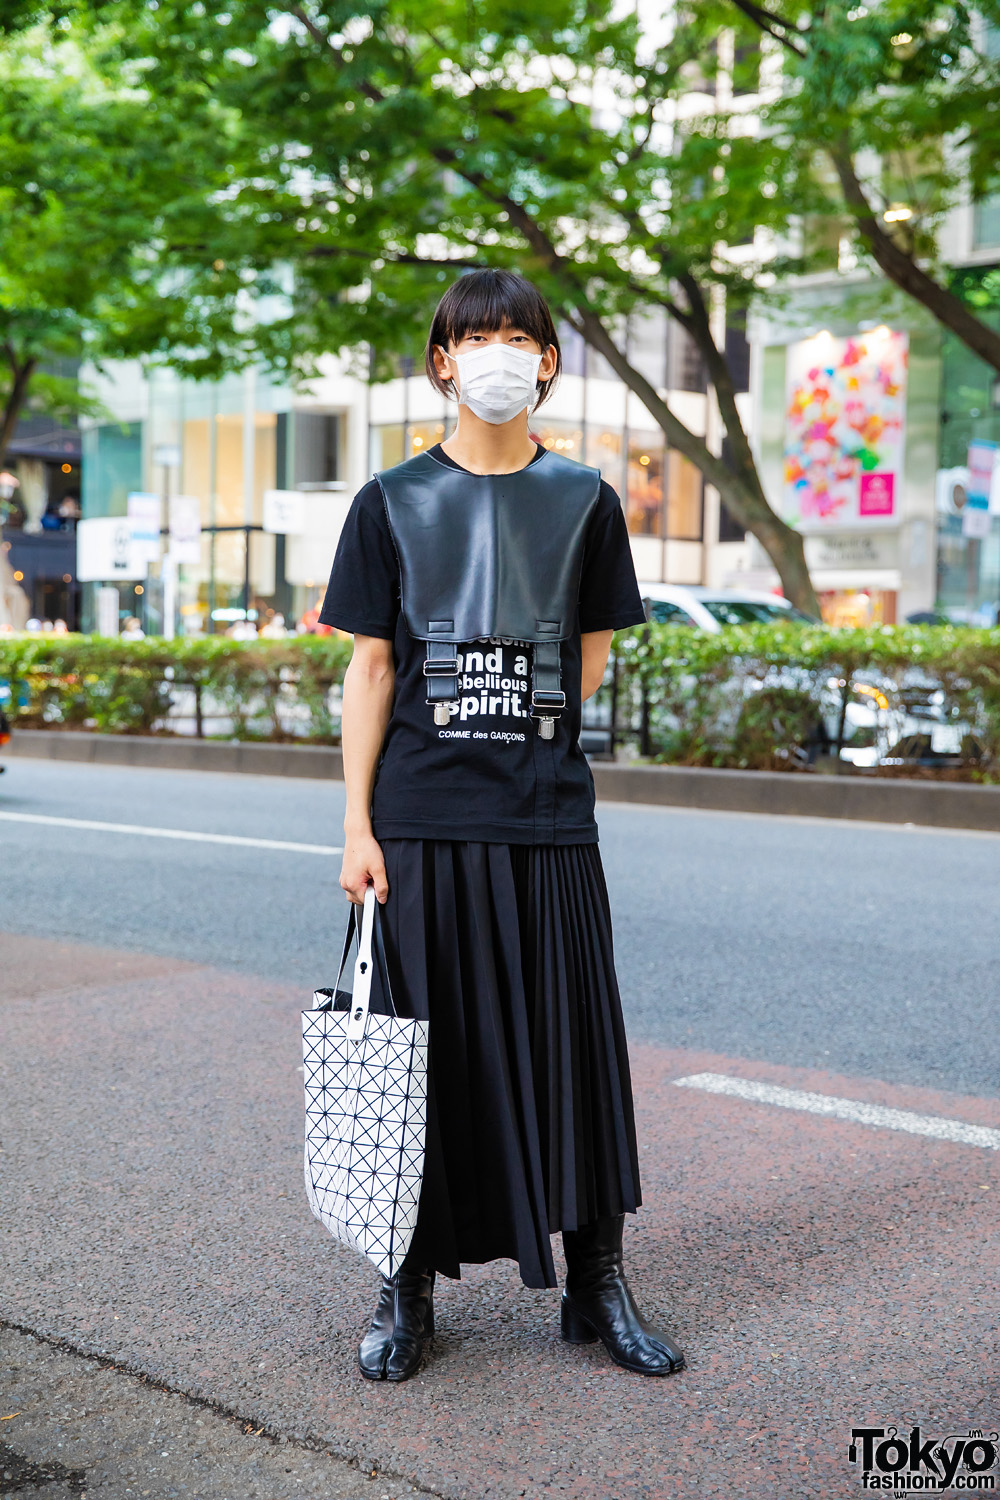 Tokyo Comme des Garcons Street Style w/ White Face Mask, Leather Half Vest, Statement Shirt, Pleated Skirt, Issey Miyake Bao Bao Bag & Maison Margiela Tabi Boots